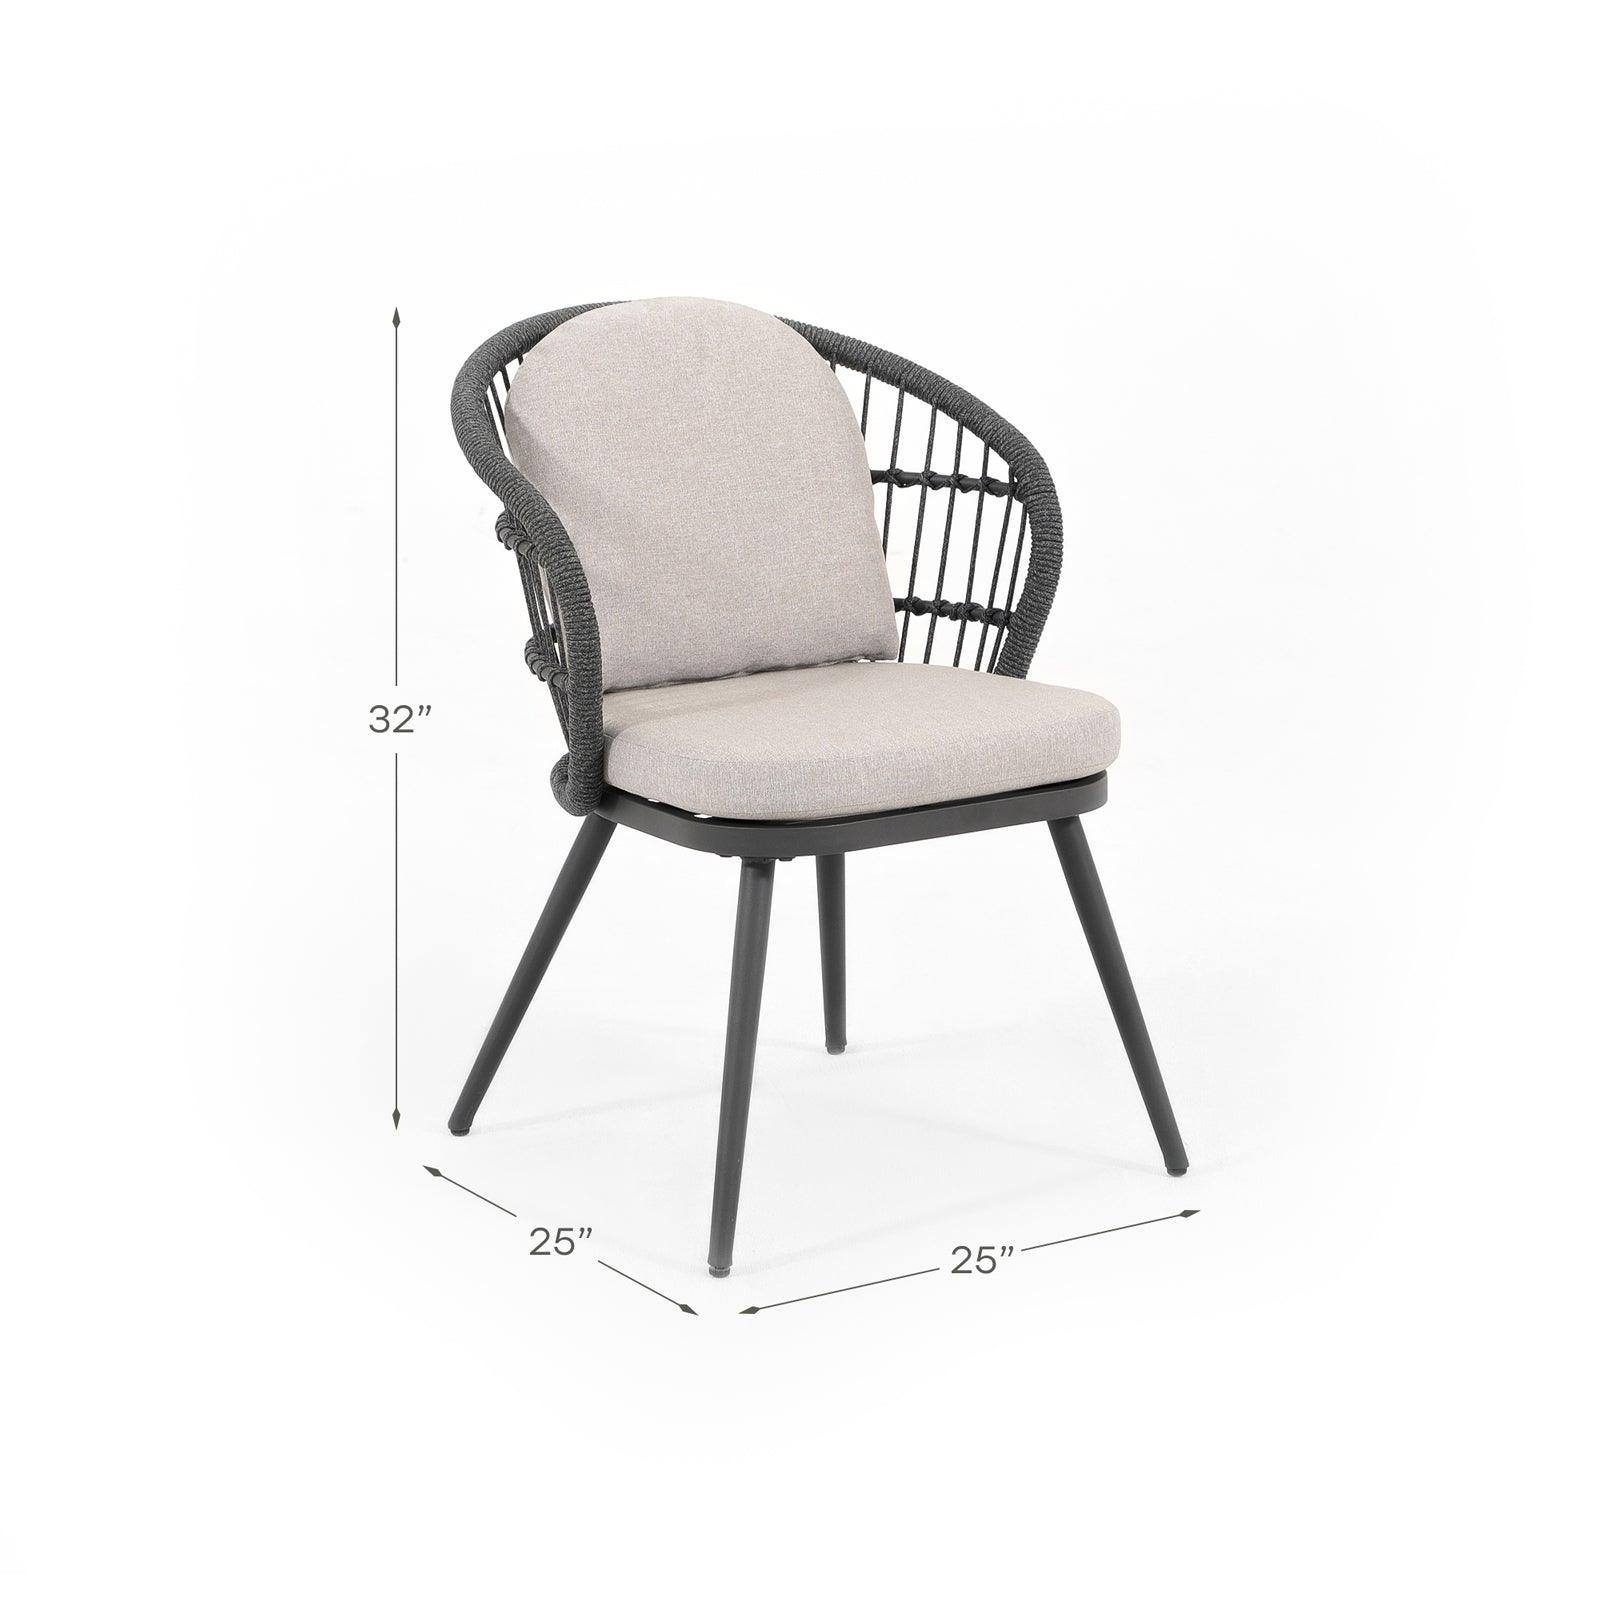 Comino dark grey aluminum frame dining chair with backrest rope design and light grey cushions, Dimension info- Jardina Furniture